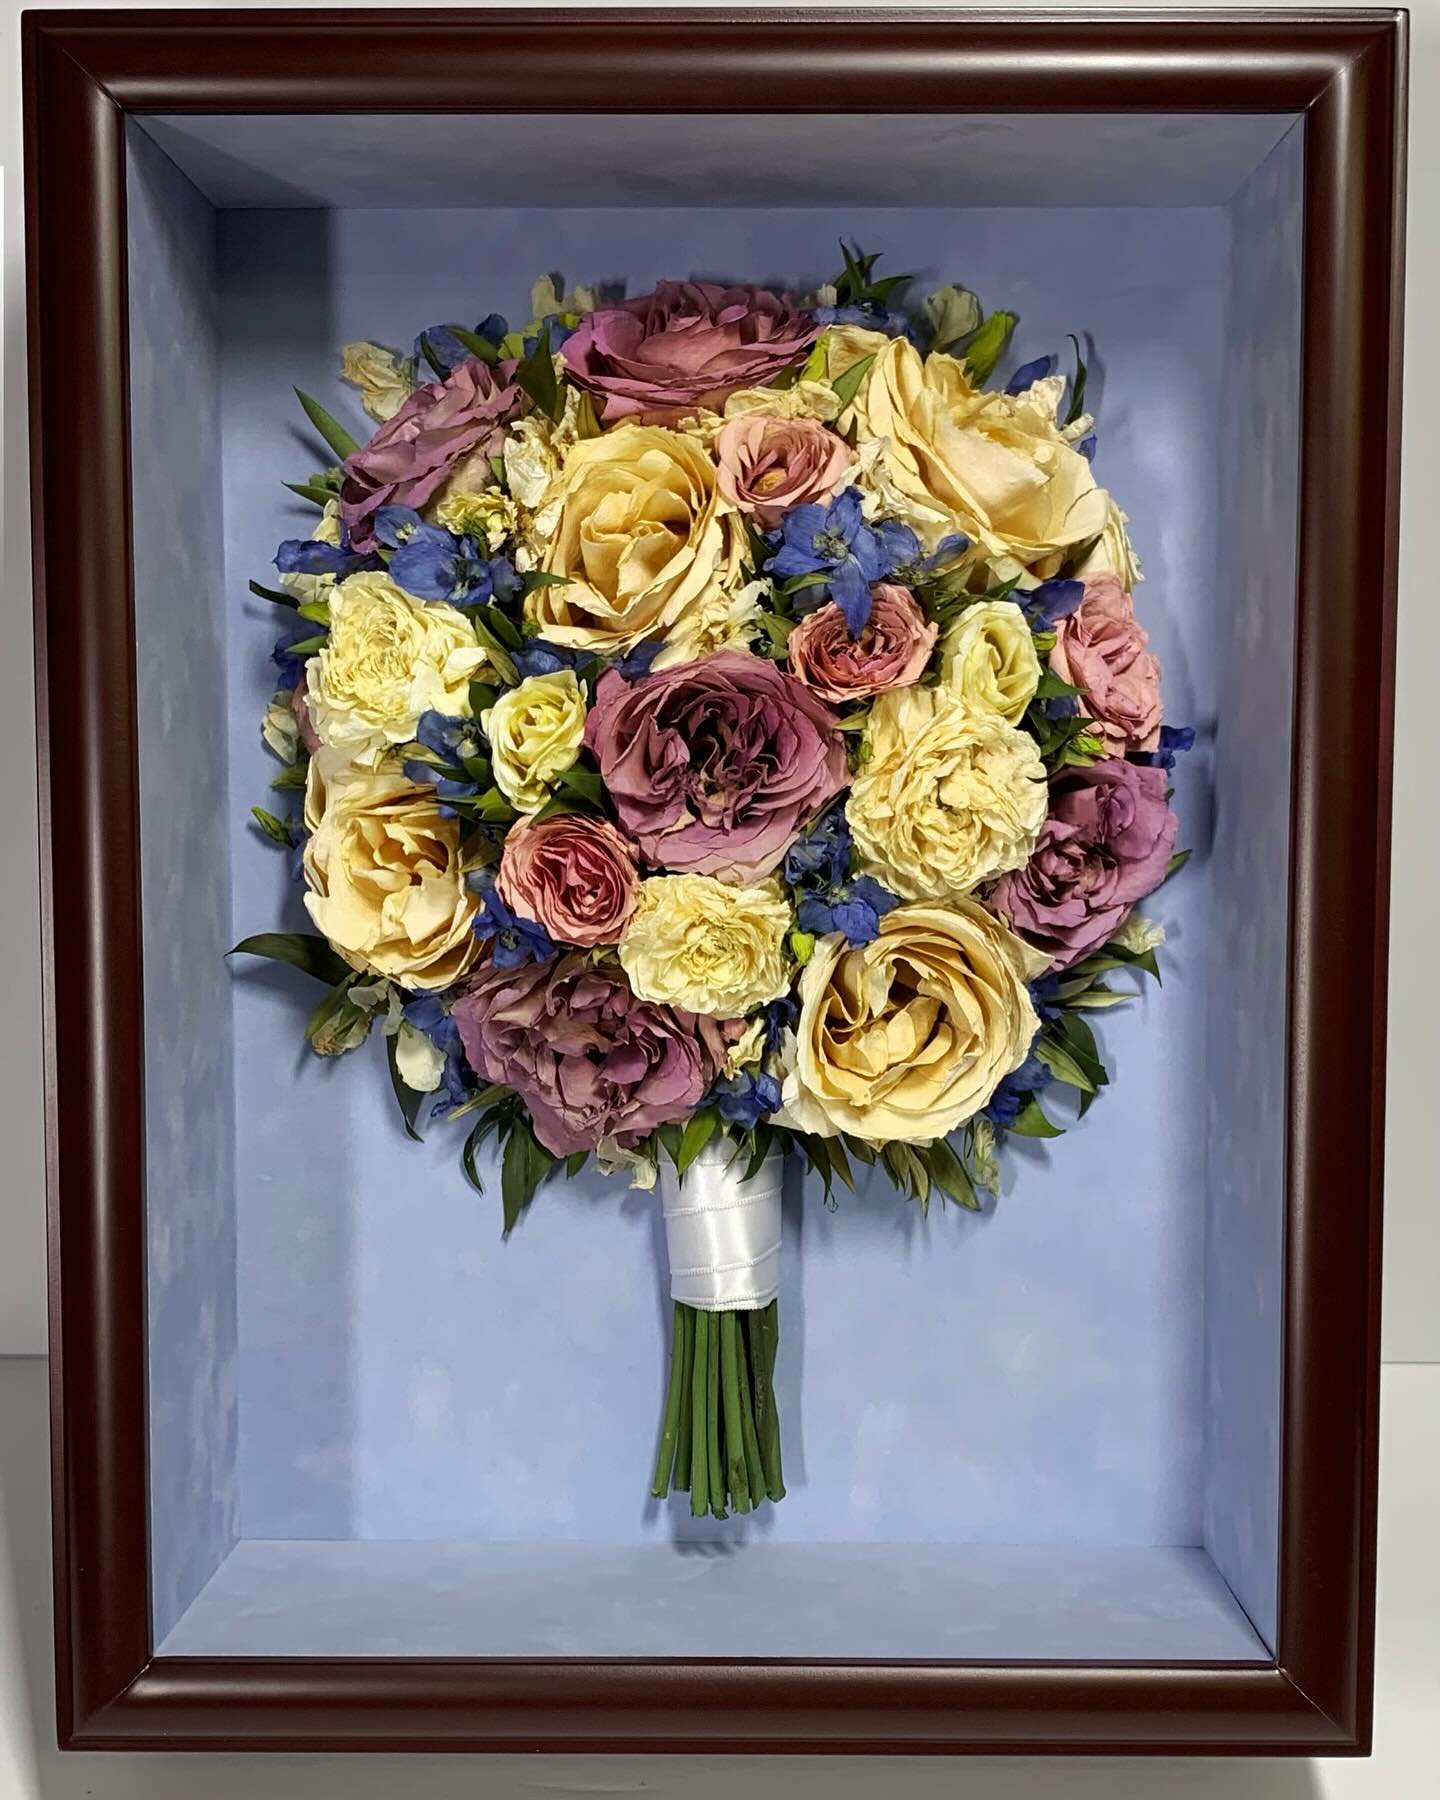 Bright bouquets always brighten my days 😍 &bull;
&bull;
&bull;
&bull;
Pictured is a 12x16 Cherry frame with a Celestial Blue Suede backing&bull;
&bull;
#flowerpreservation #weddingbouquet #weddingflowers